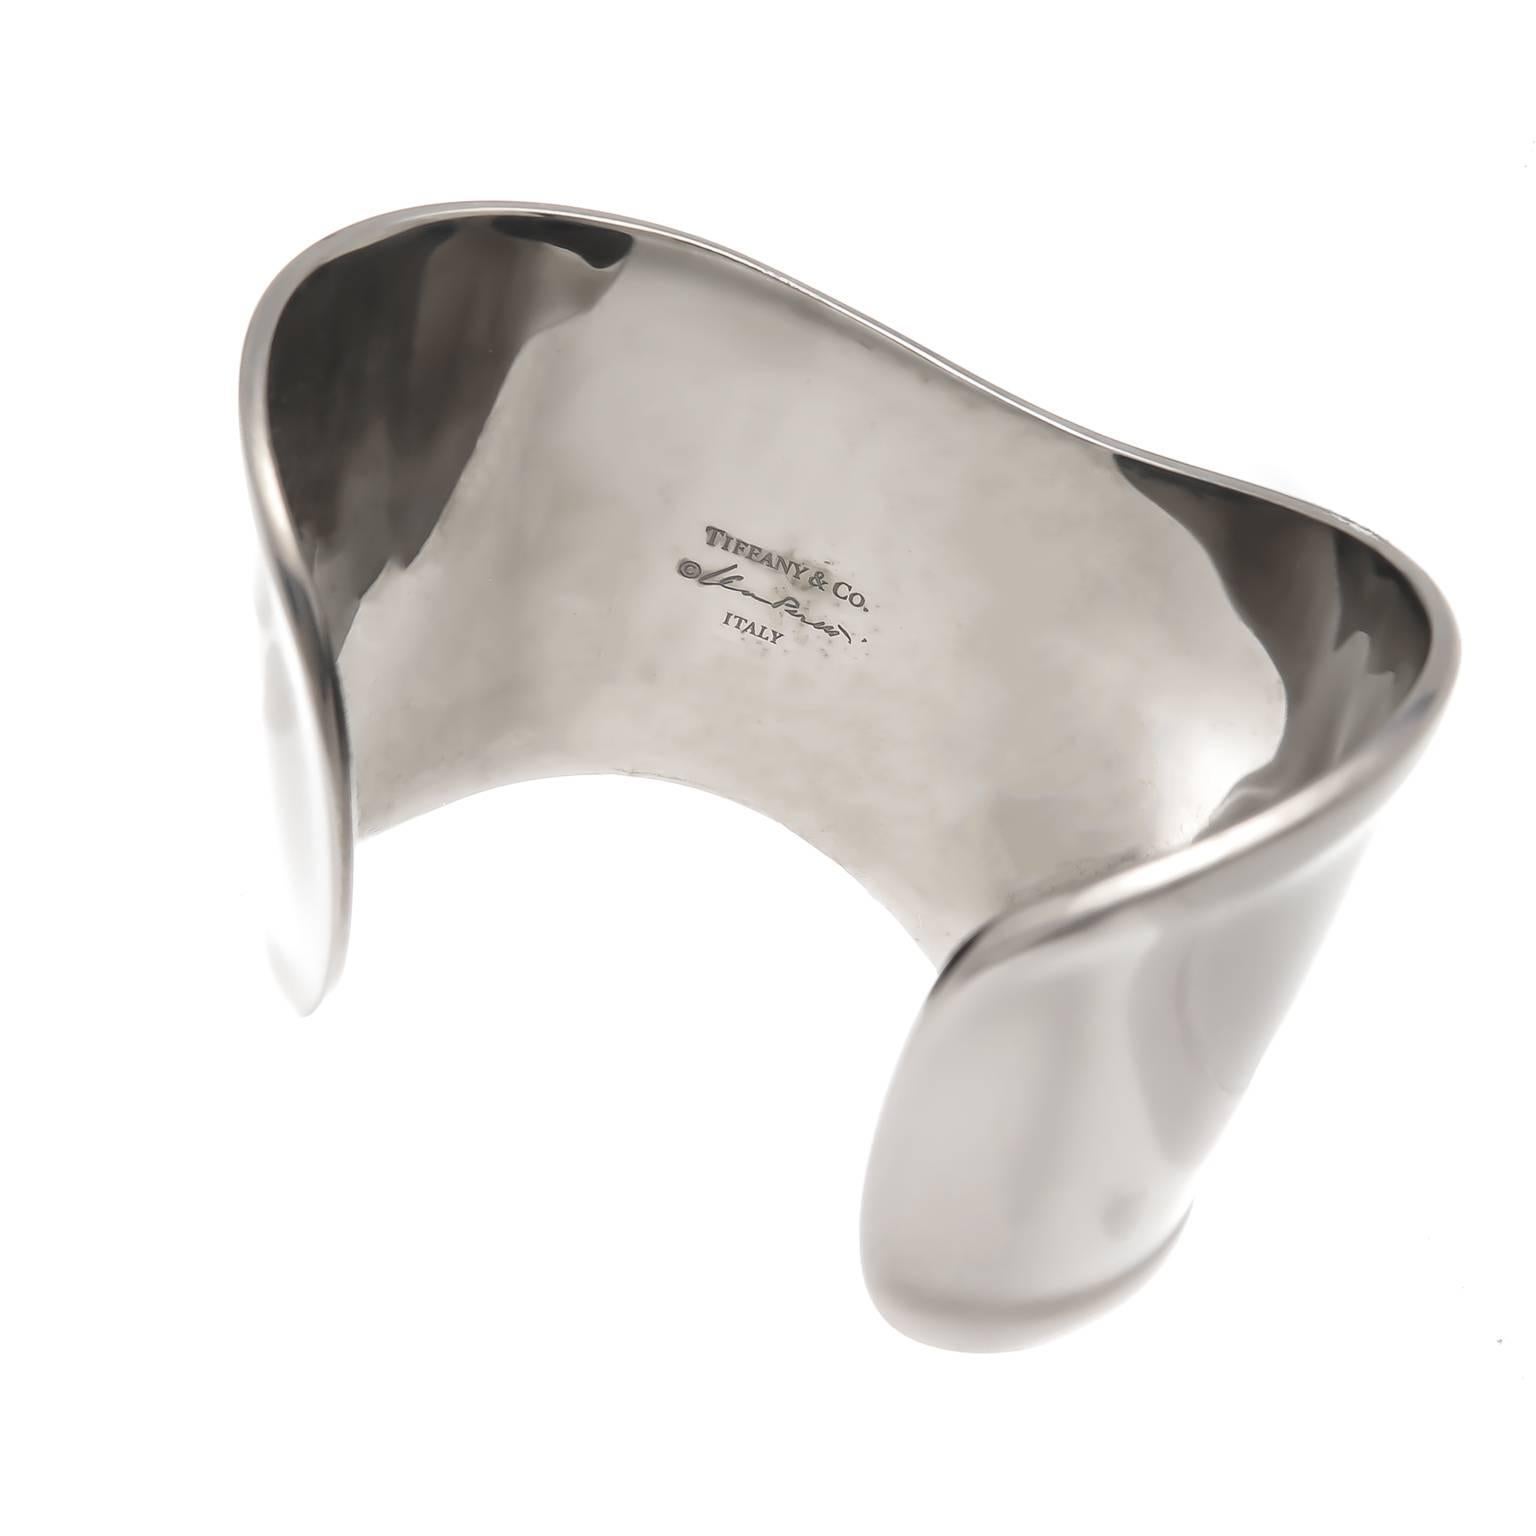 Circa 2014 Elsa Peretti for Tiffany & Company Ruthenium Bone Cuff Bracelet, medium size for the right wrist measuring 2 inch wide with an opening that measures 1 1/4 inch. Comes in original Tiffany Gift Box.